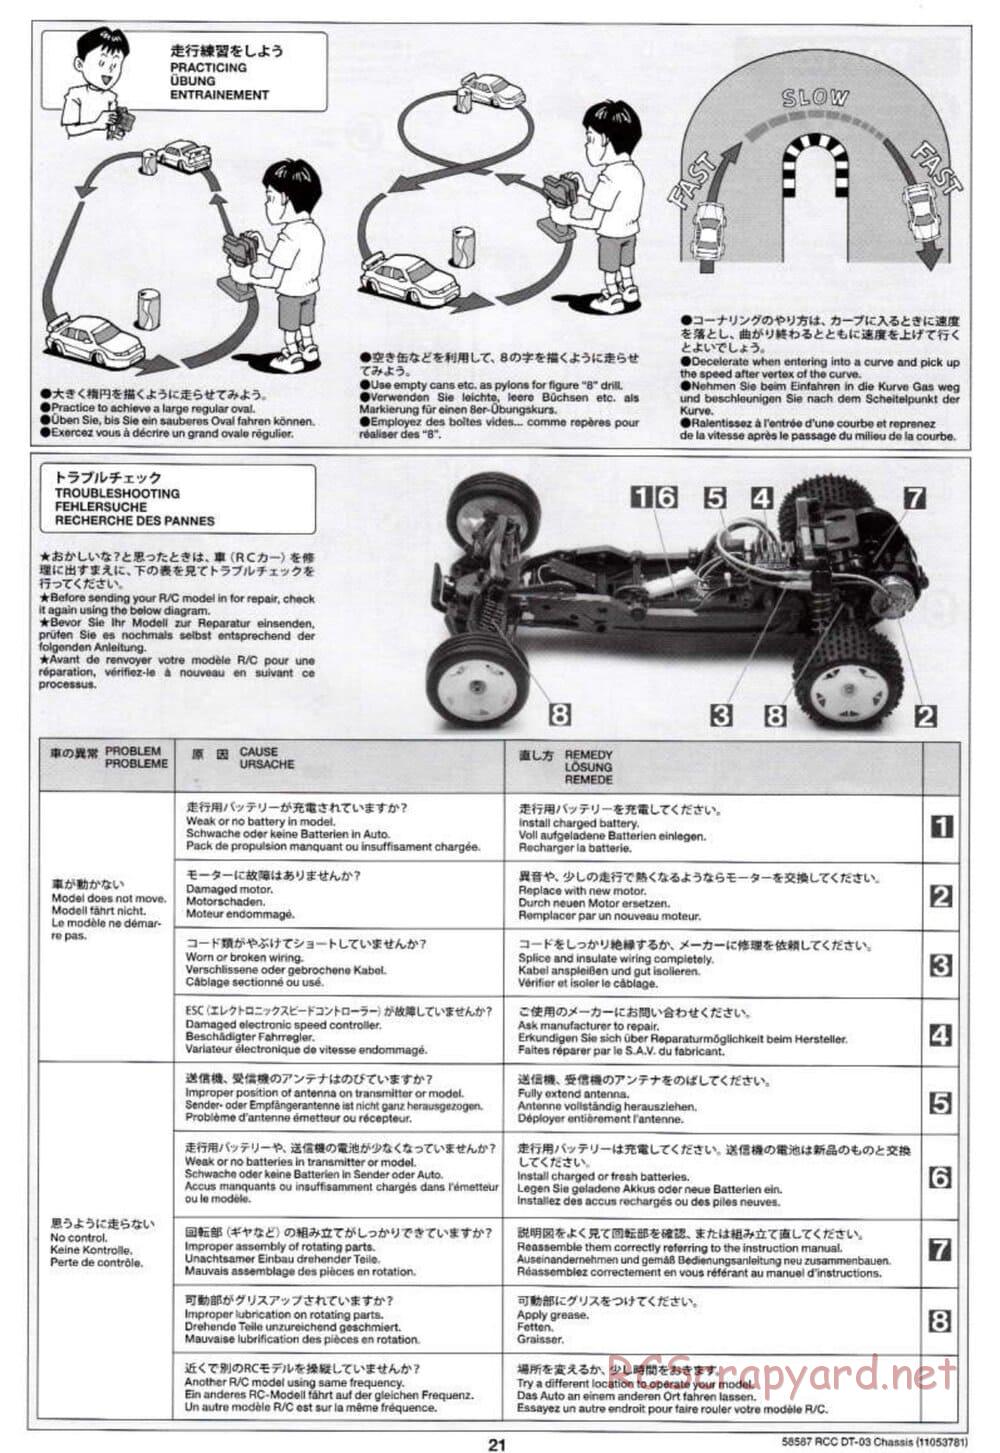 Tamiya - Neo Fighter Buggy Chassis - Manual - Page 21